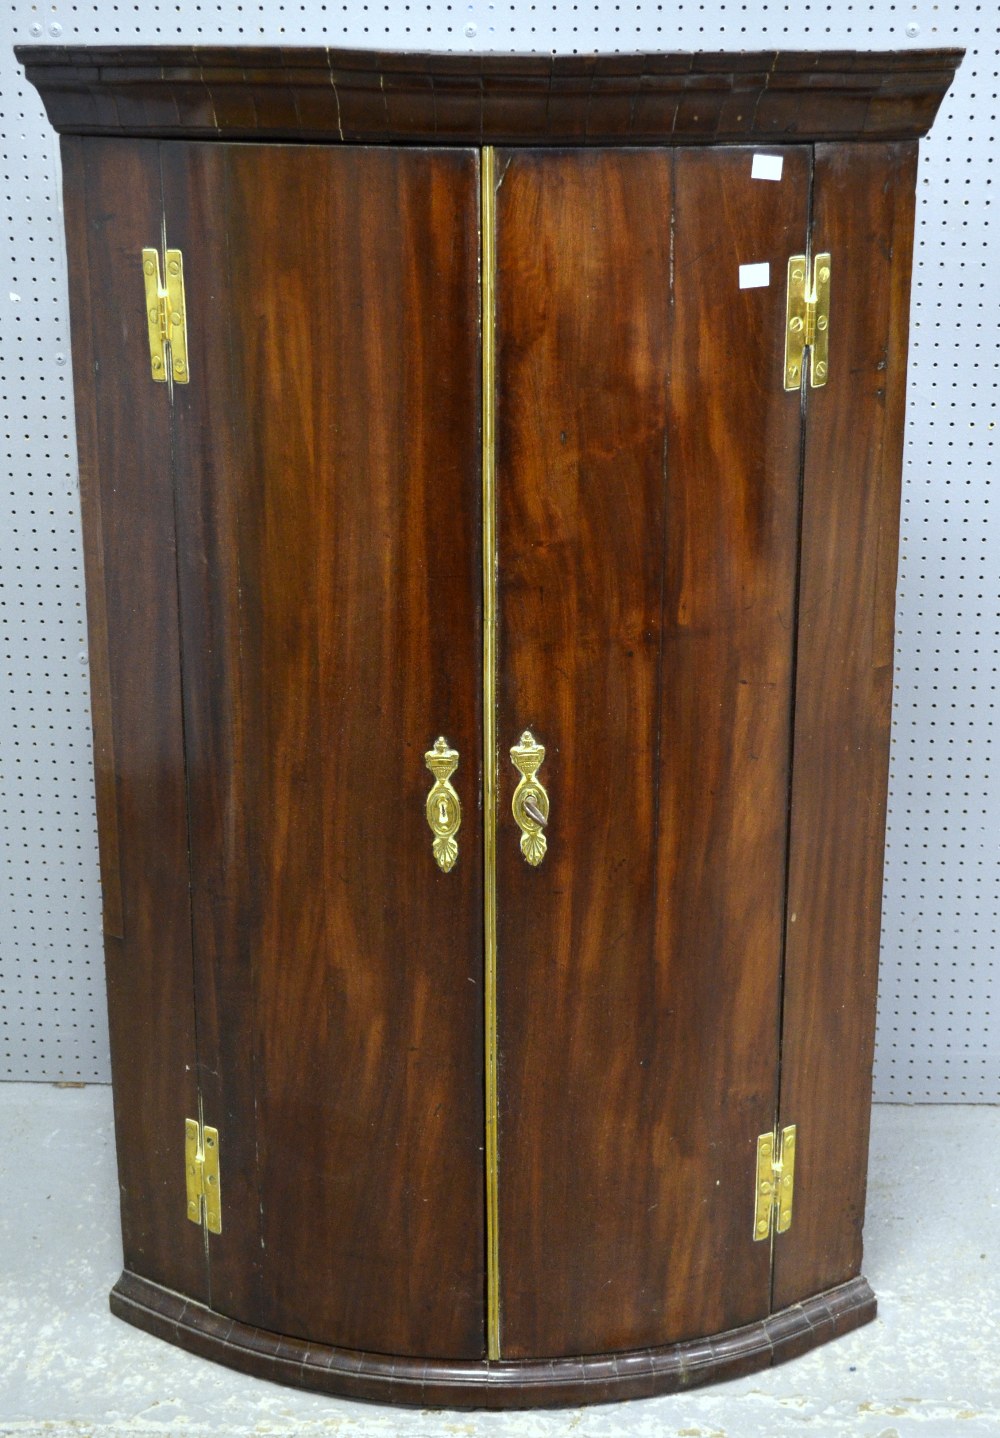 19th century mahogany wall hanging bowfronted corner cupboard, the two doors revealing shelves